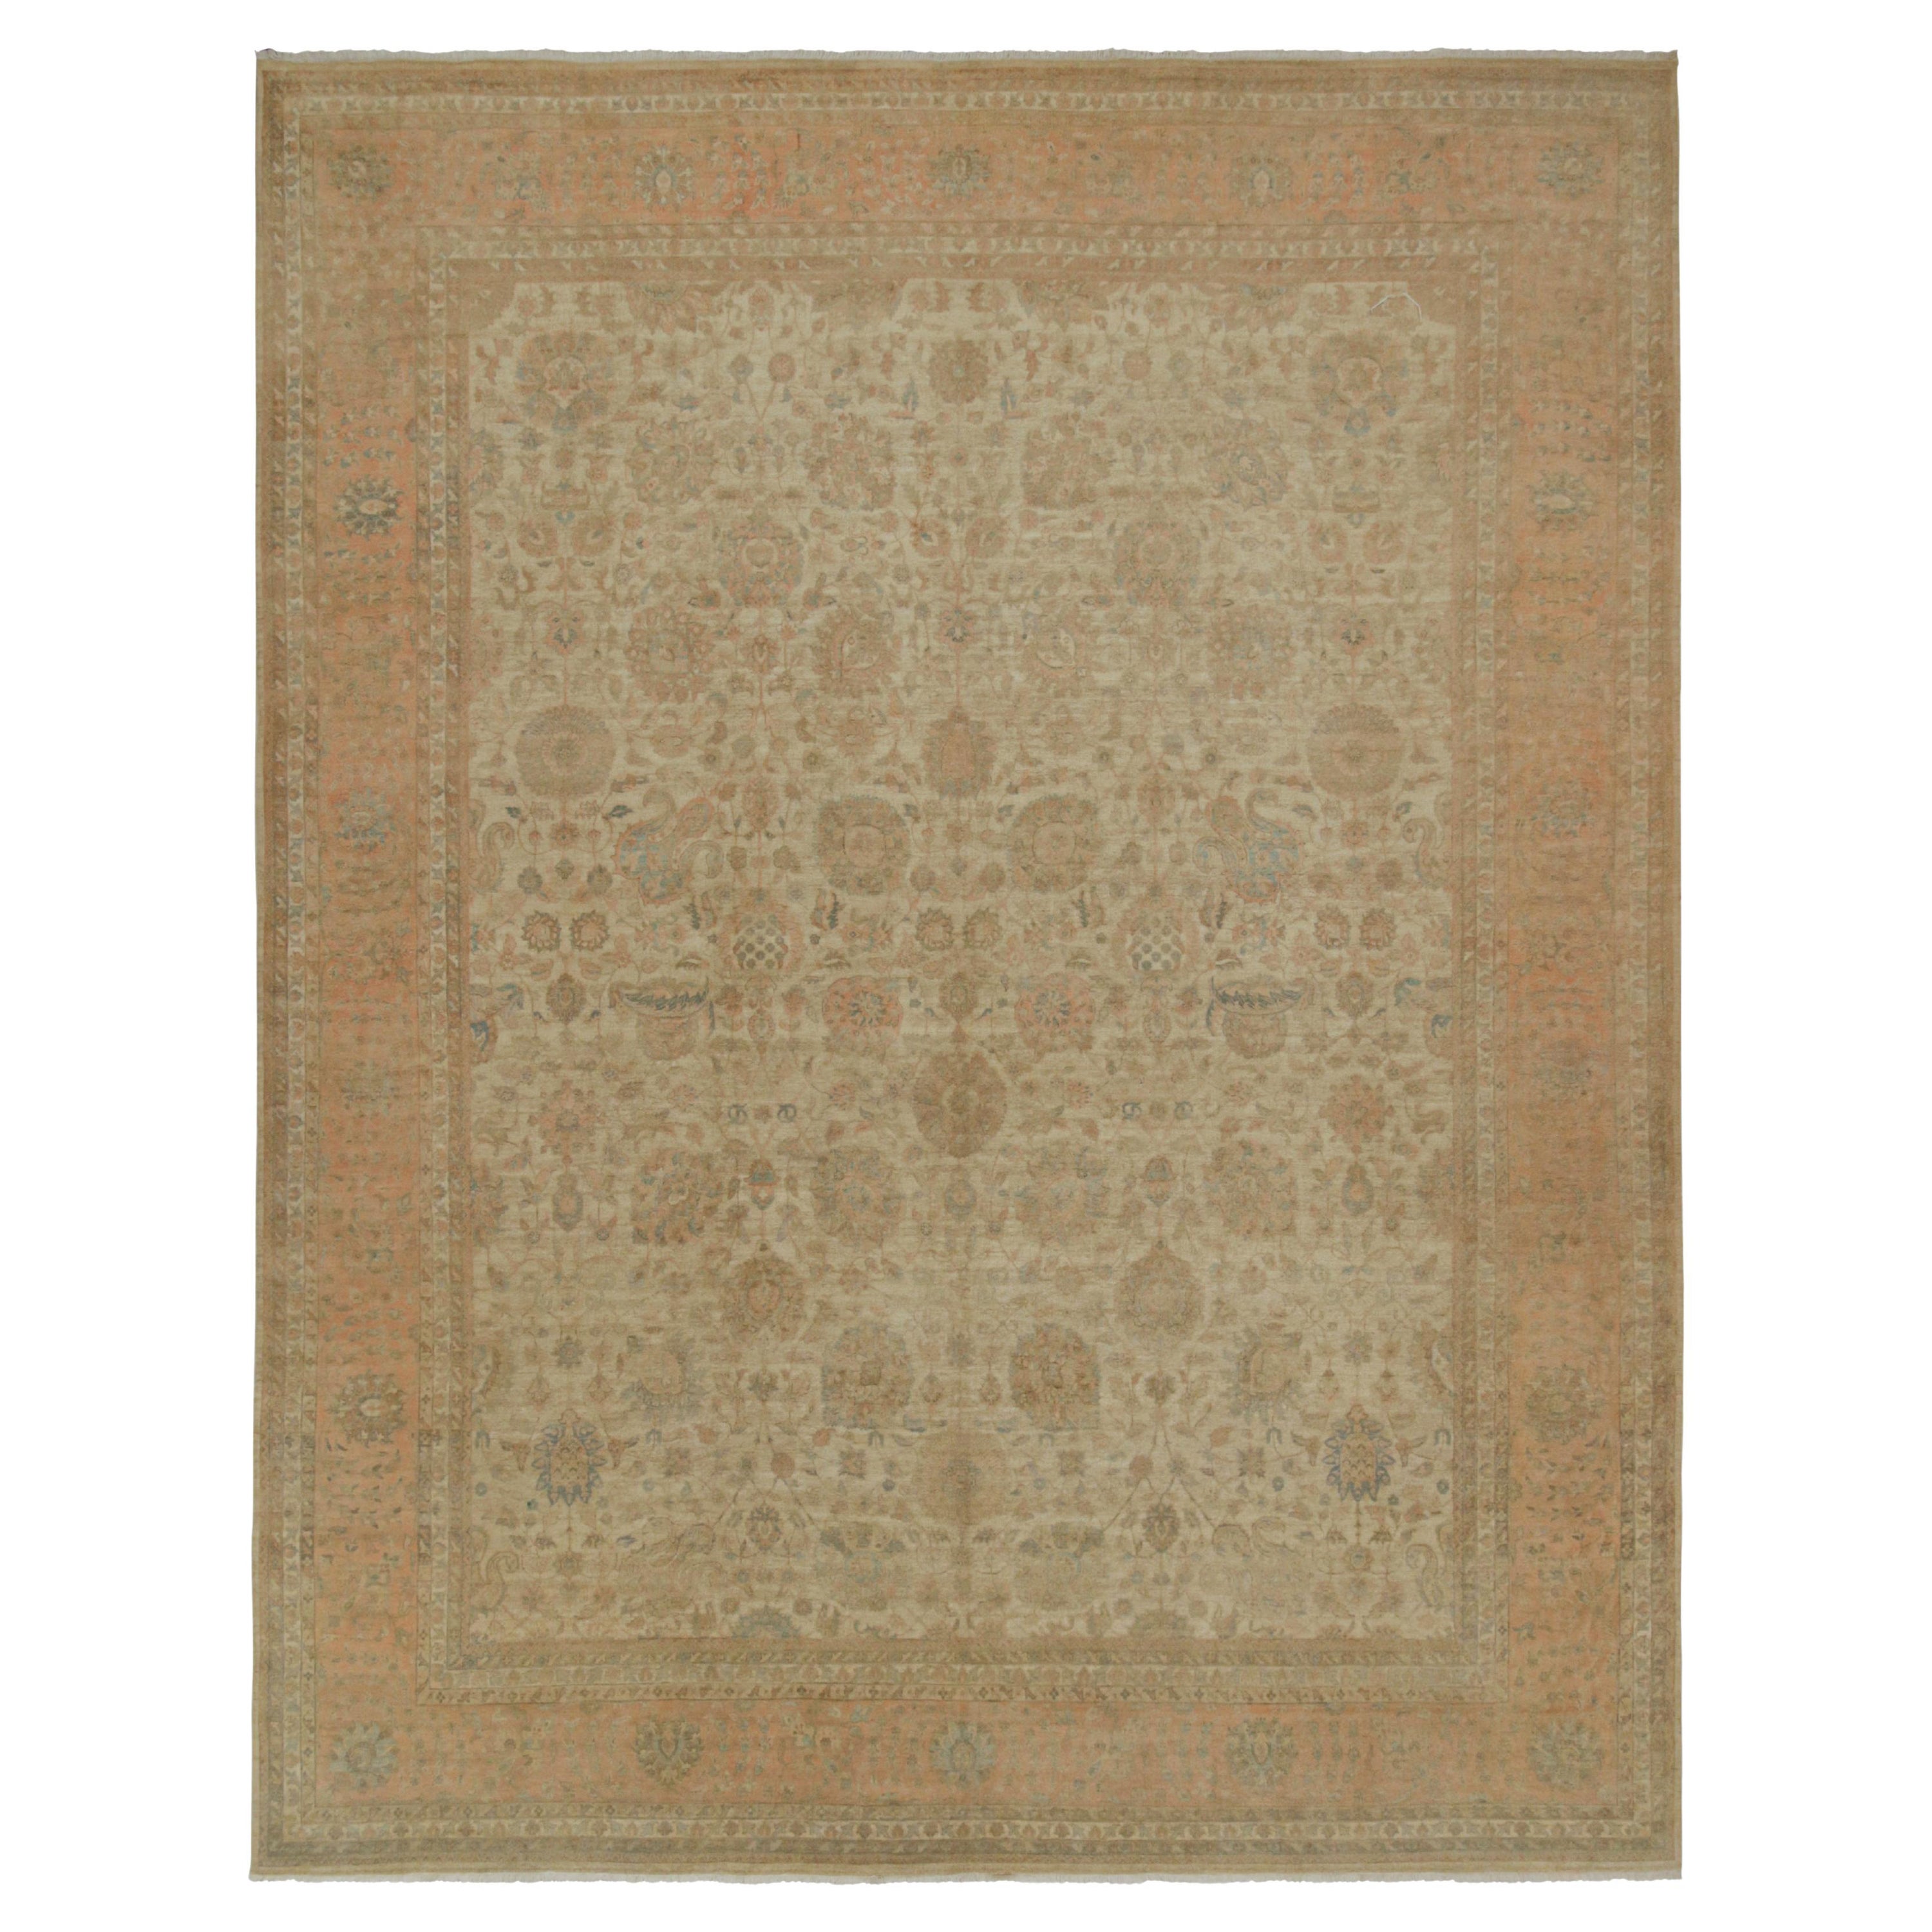 Rug & Kilim’s Classic Persian Style Rug in Beige-Brown with Pink Floral Patterns